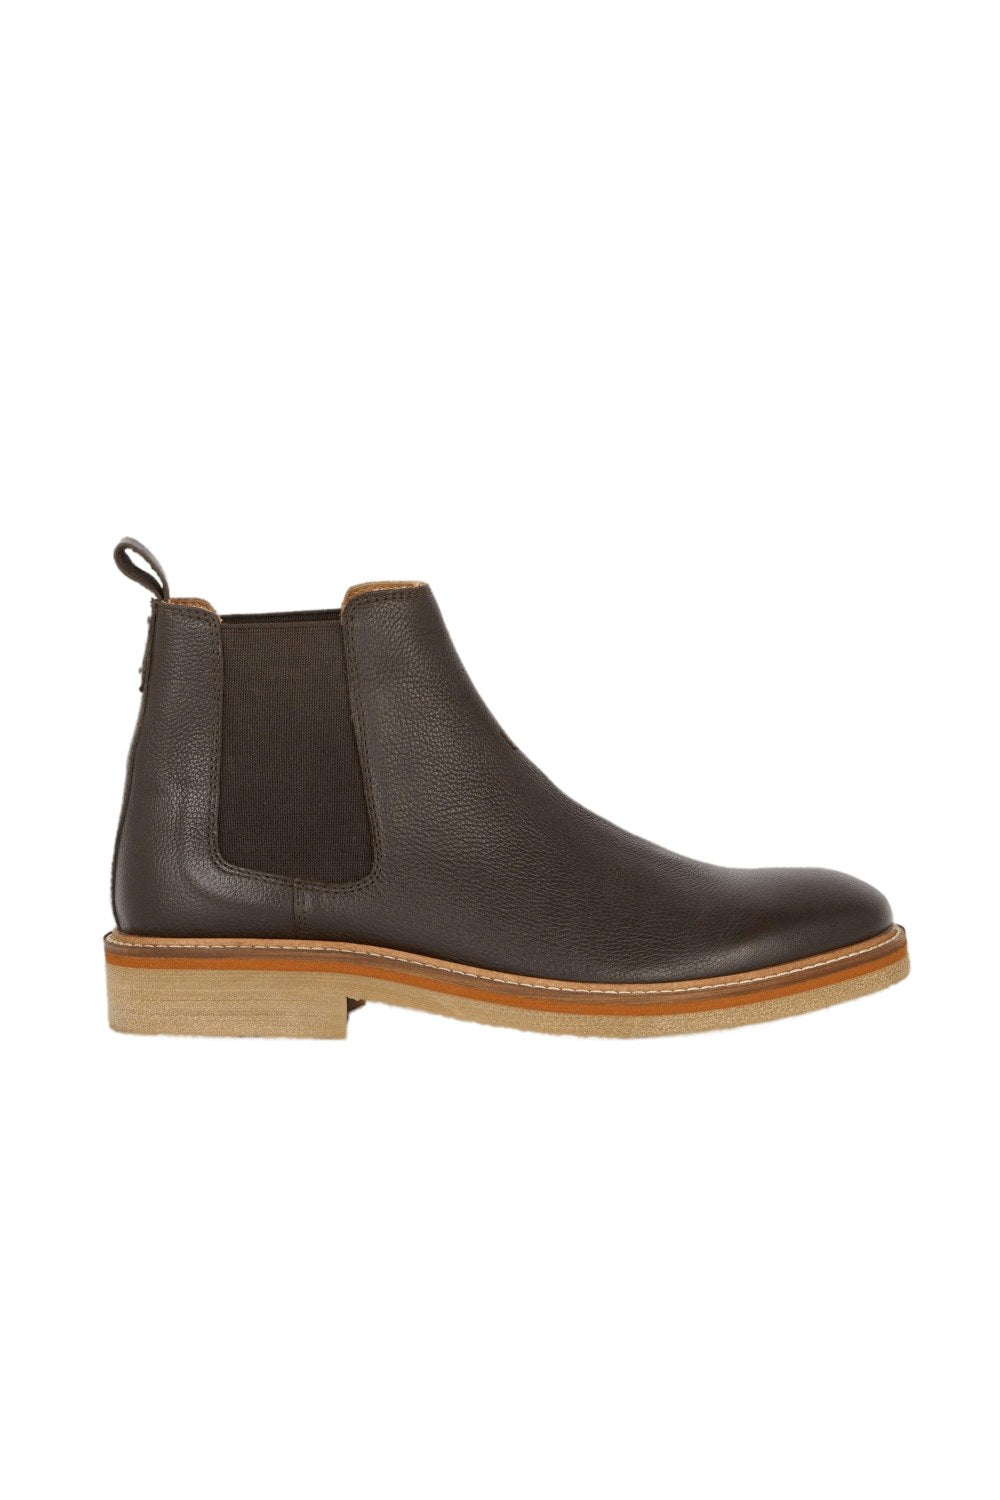 Mens Crepe Effect Leather Chelsea Boots - Brown